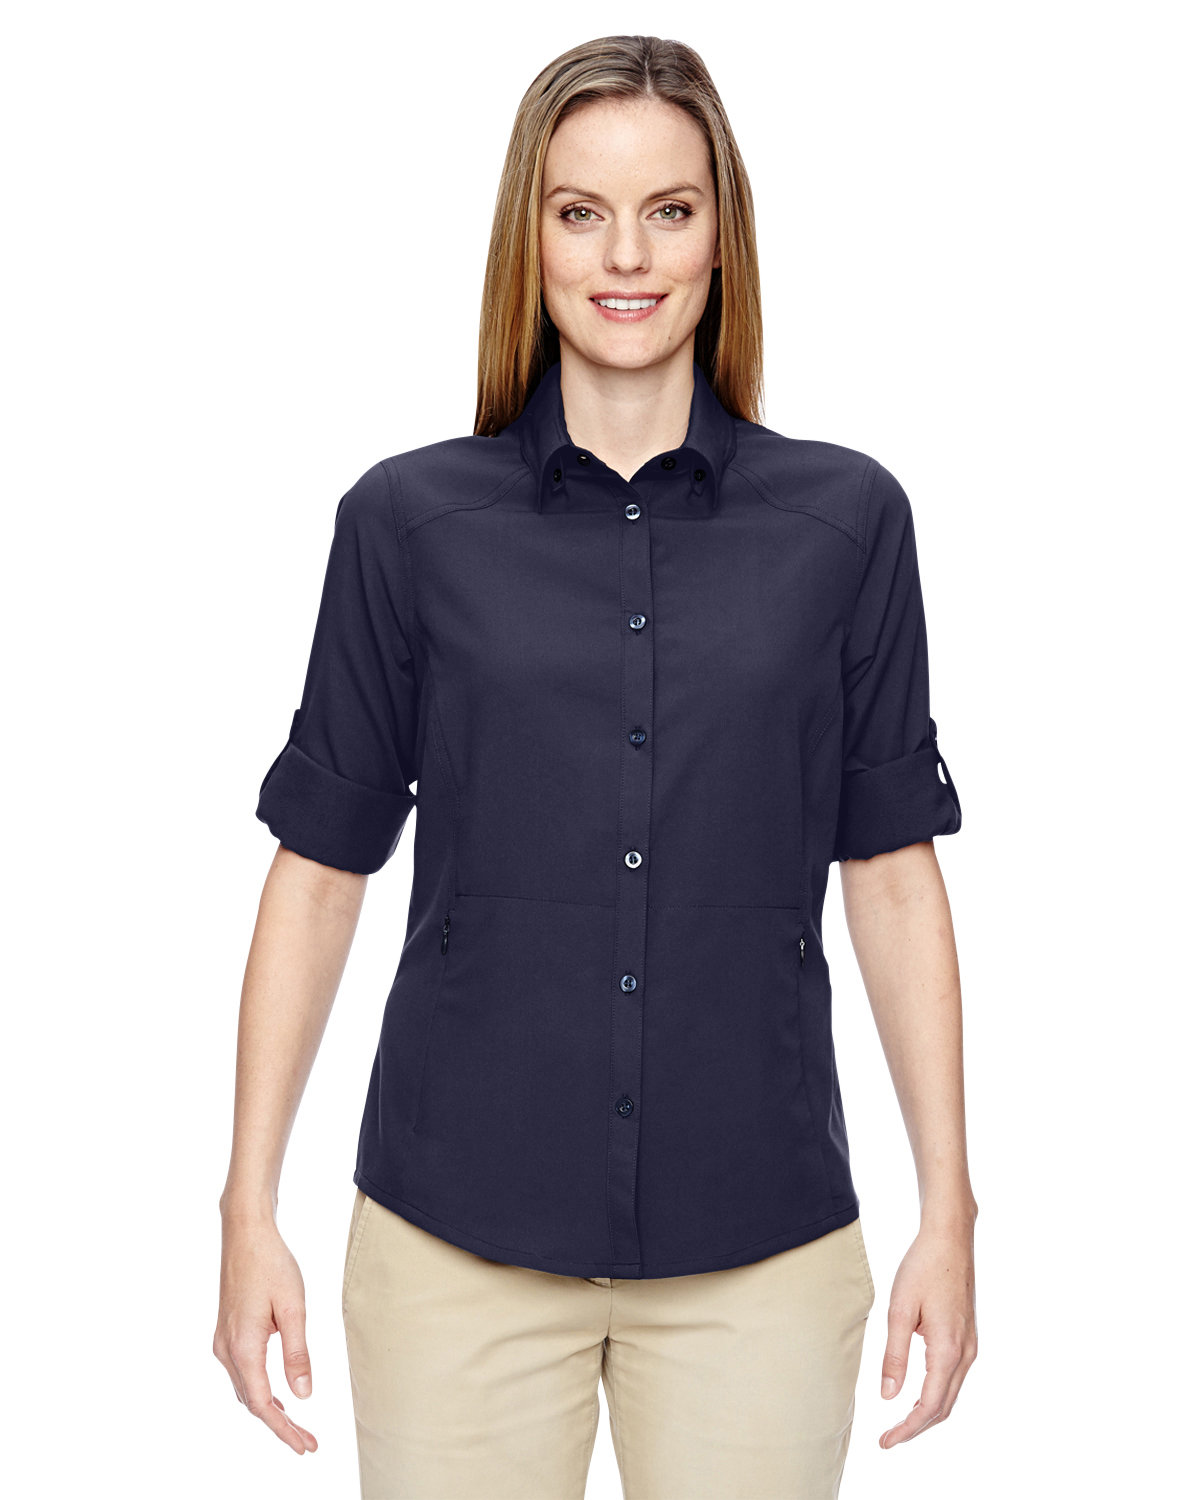 North End Ladies' Excursion Concourse Performance Shirt NAVY 